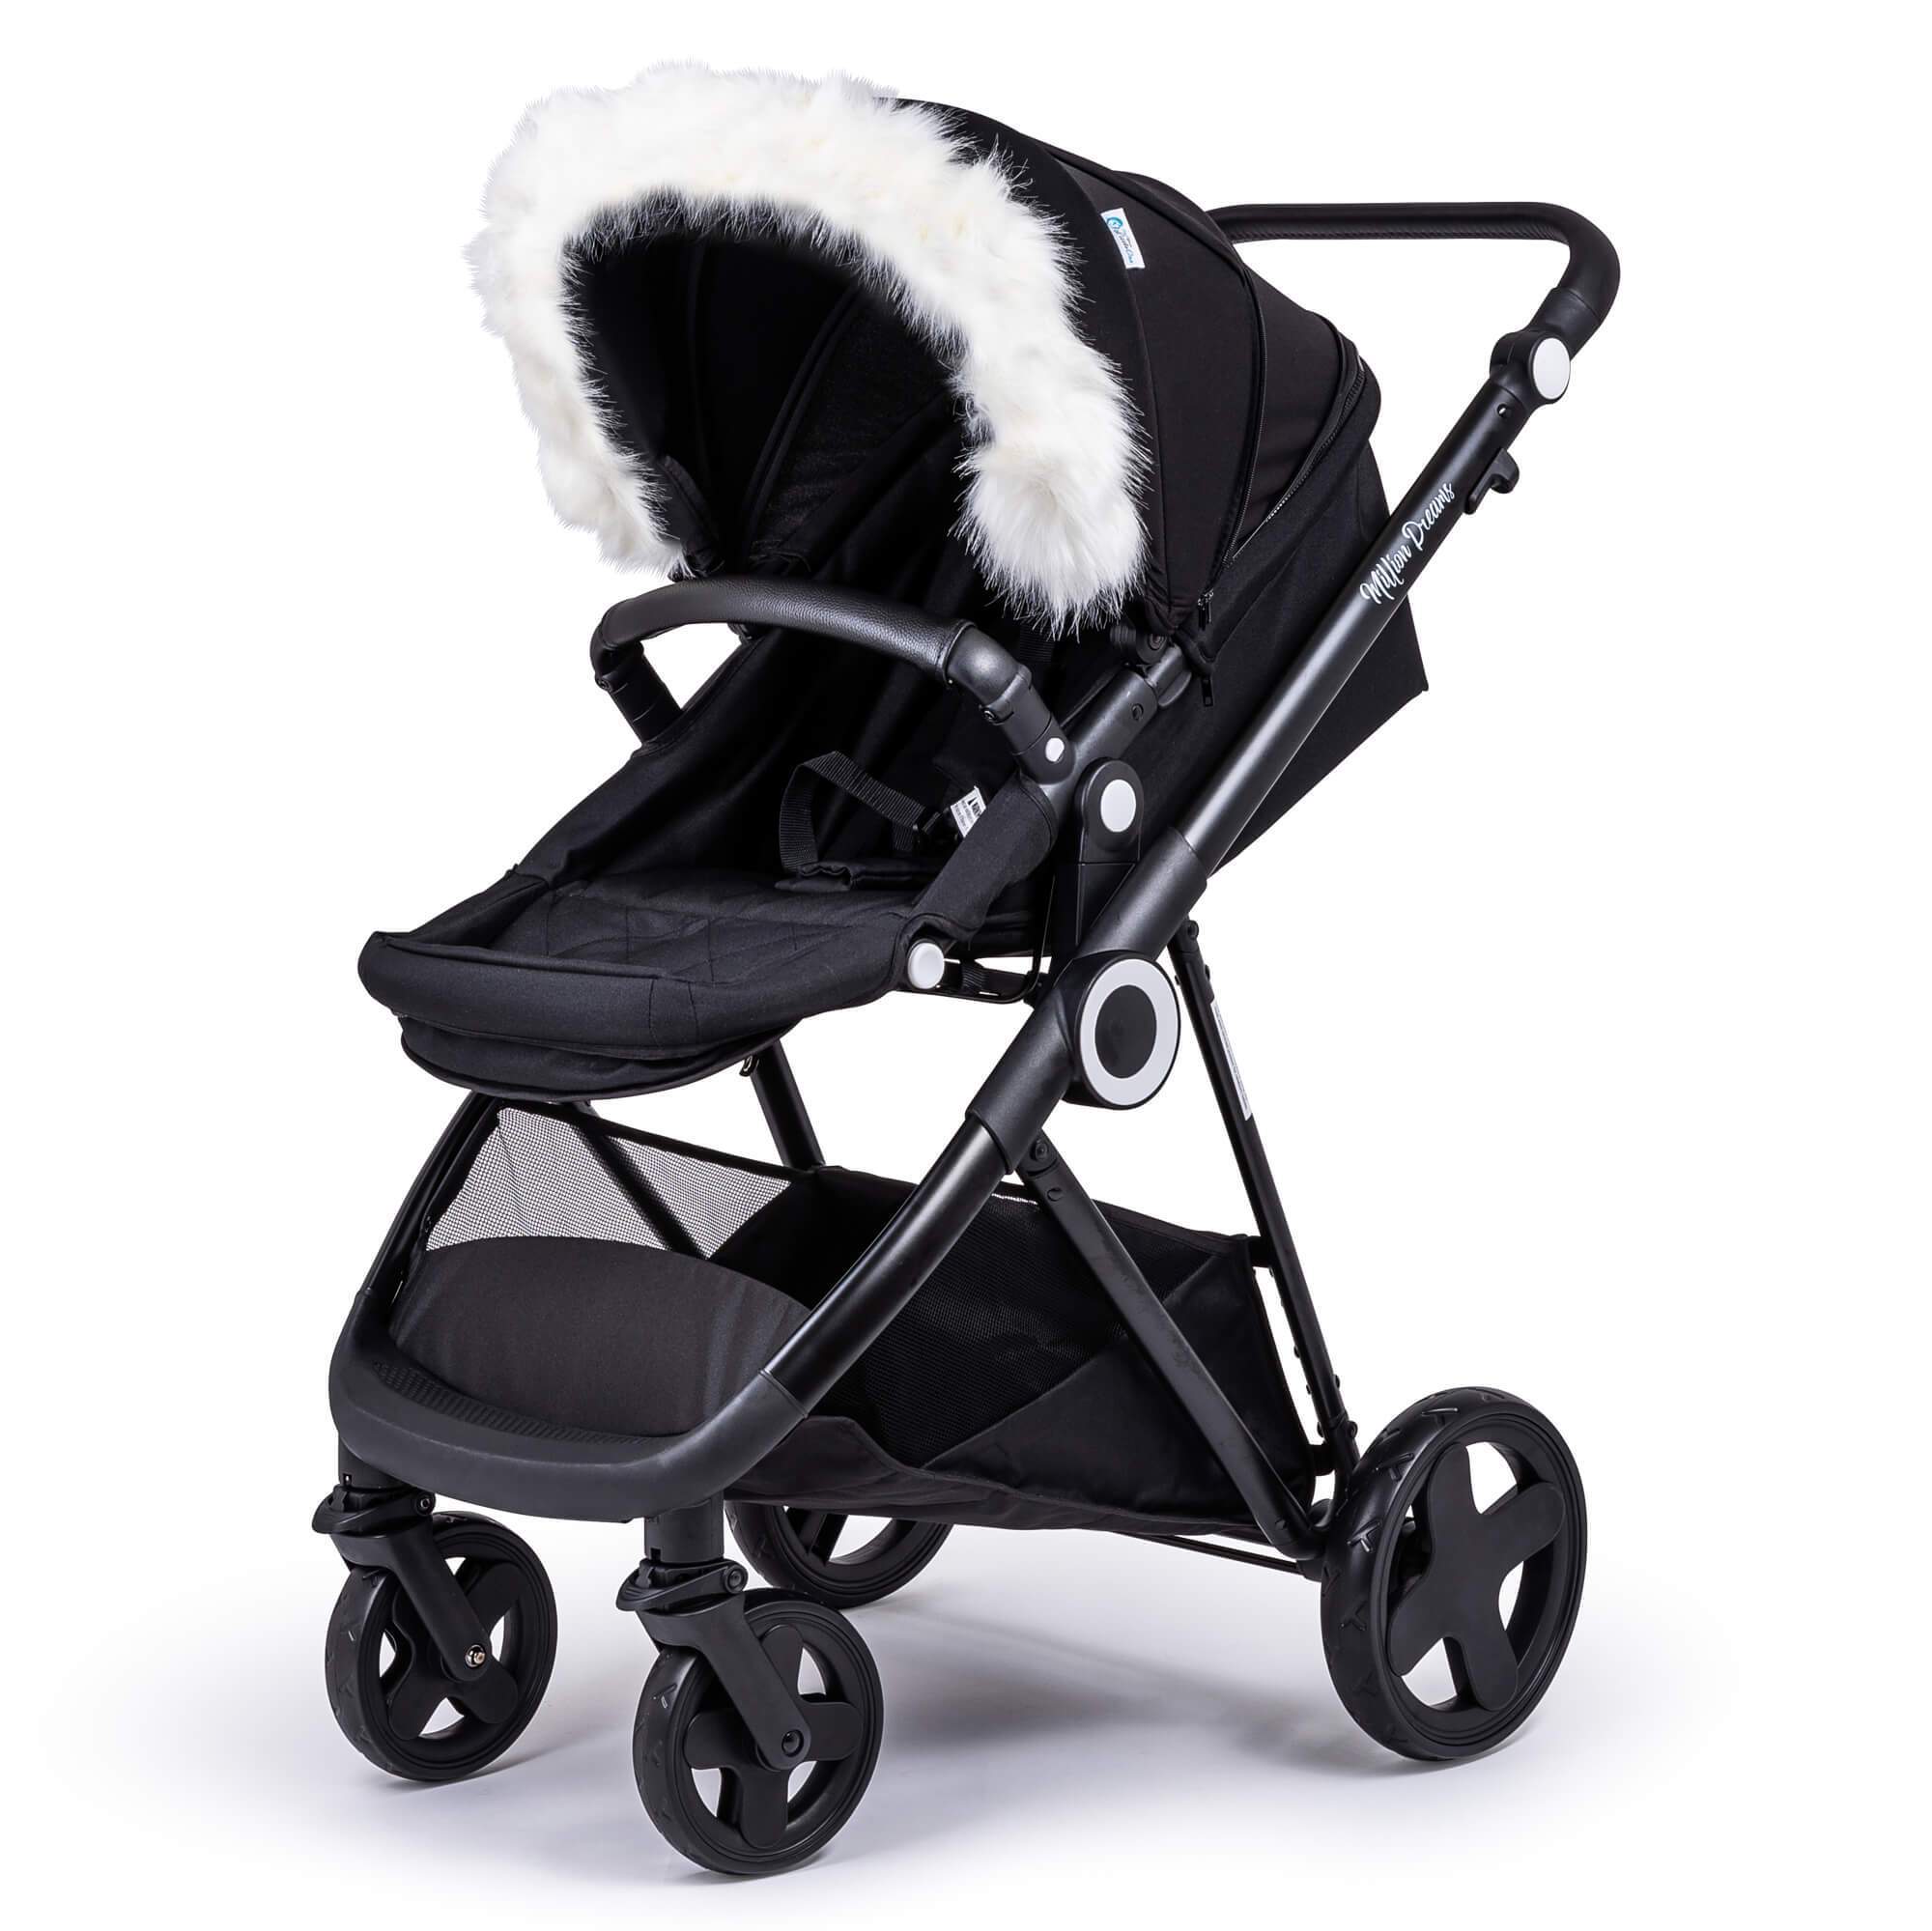 Pram Fur Hood Trim Attachment For Pushchair Compatible with Mee-Go - For Your Little One